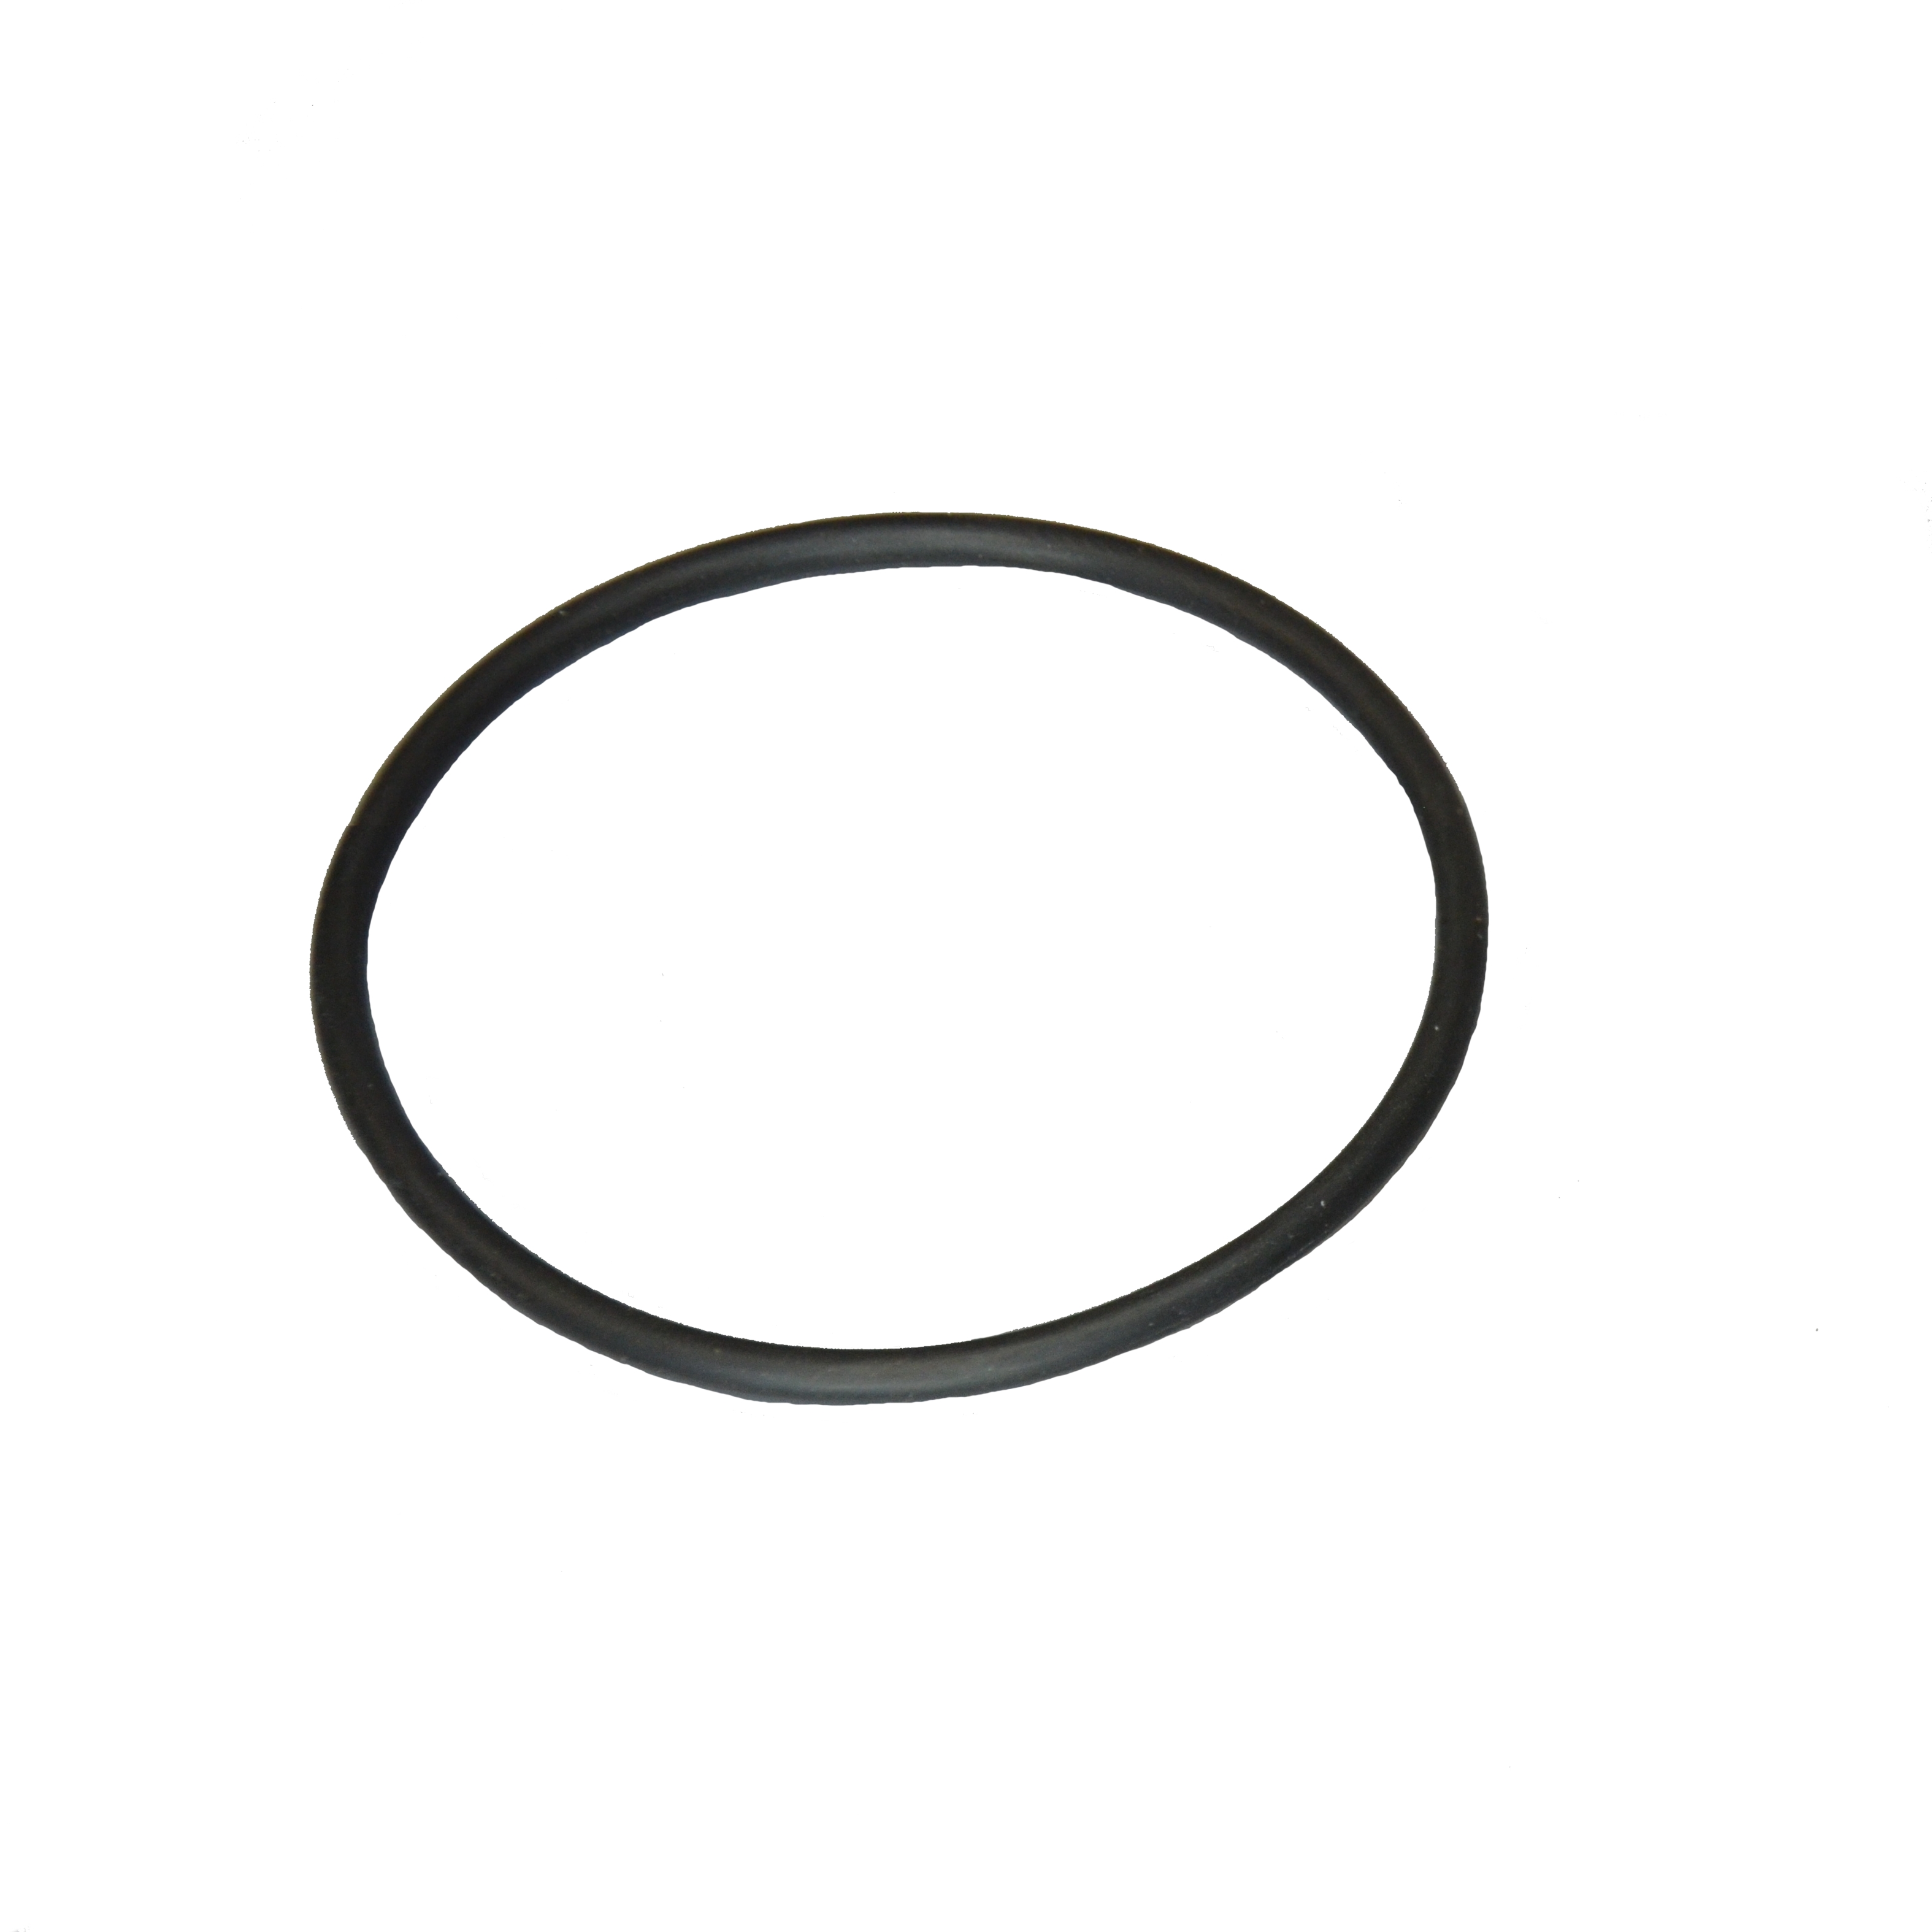 O-ring for cover of leveling system pump, increased